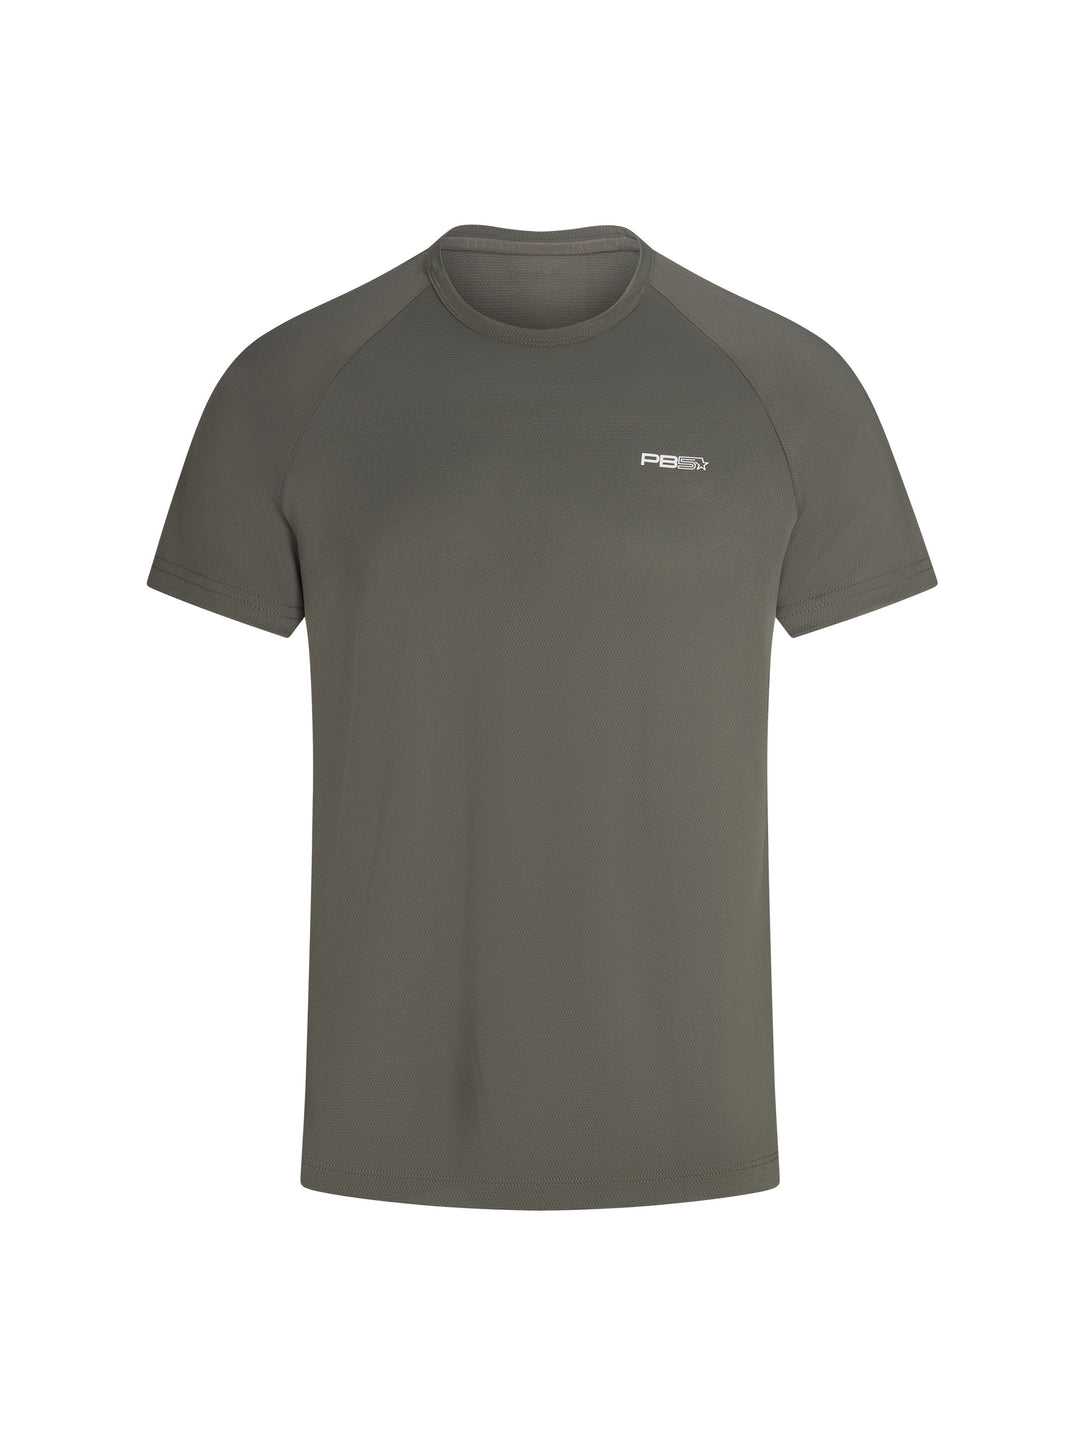 PB5star core performance tee in short sleeve, pavement color. Small logo printed on front, upper left side of shirt.